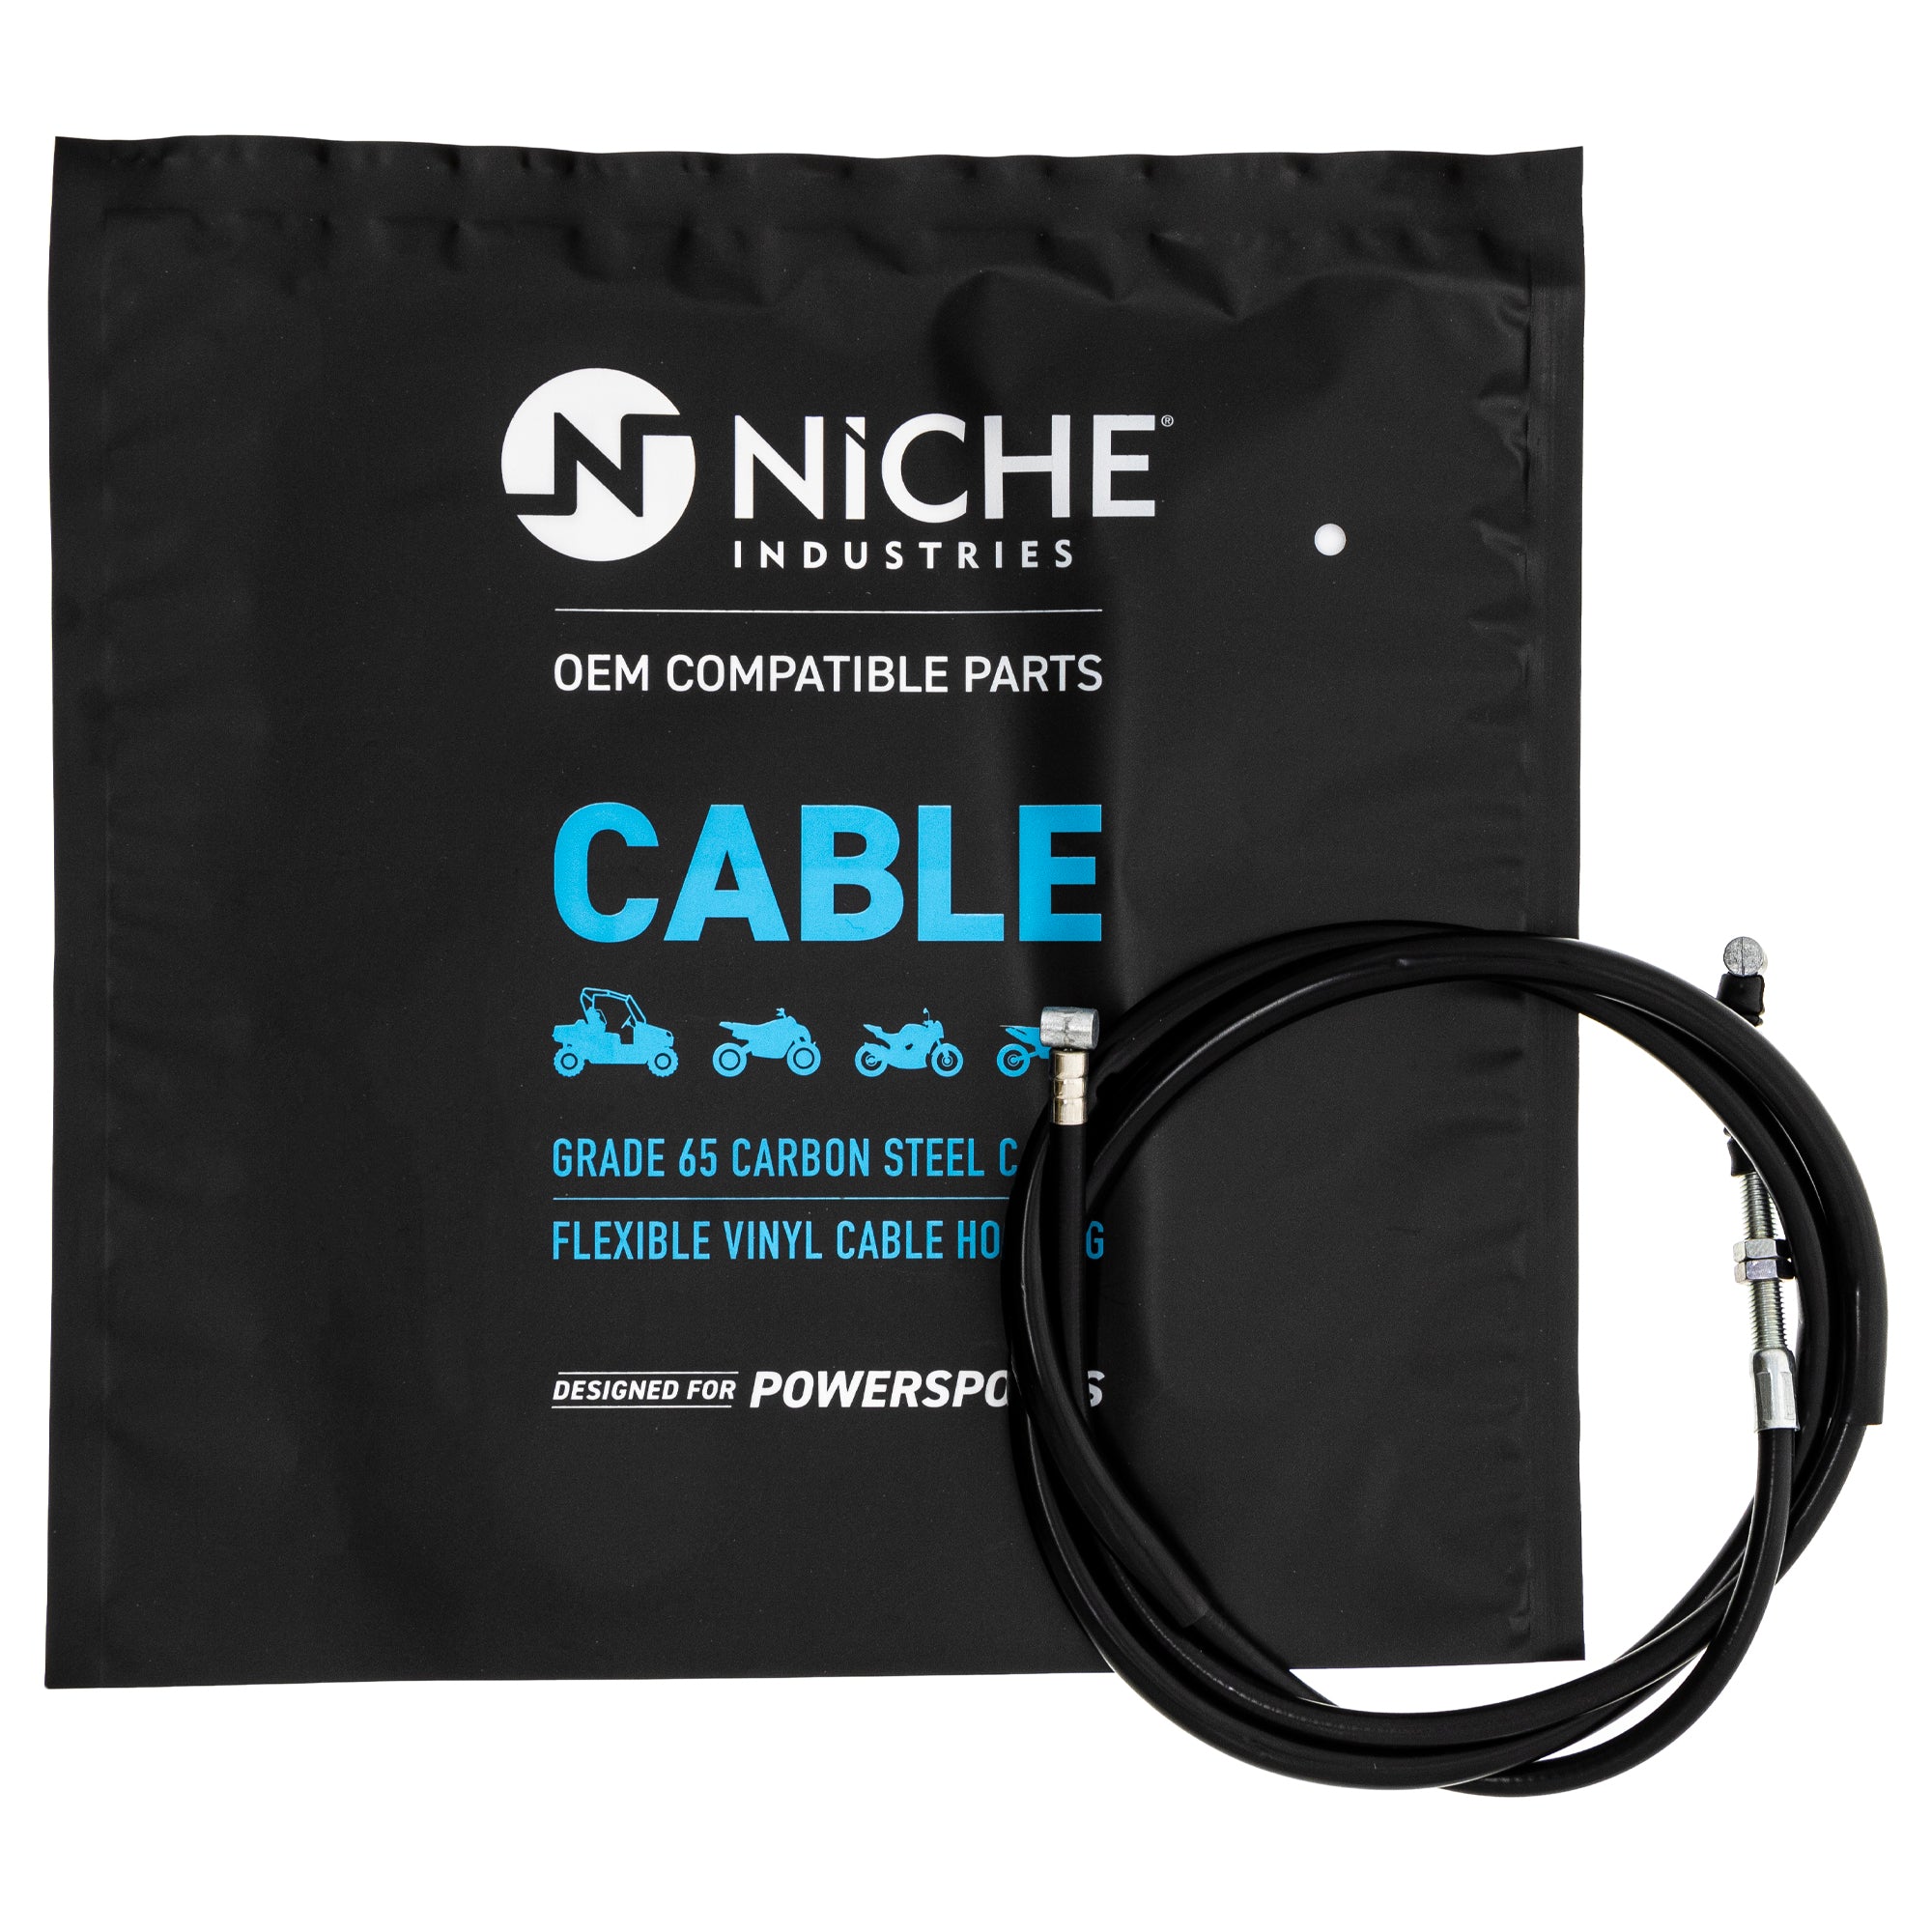 NICHE 519-CCB2754L Front Brake Cable for zOTHER CR480R CR250R